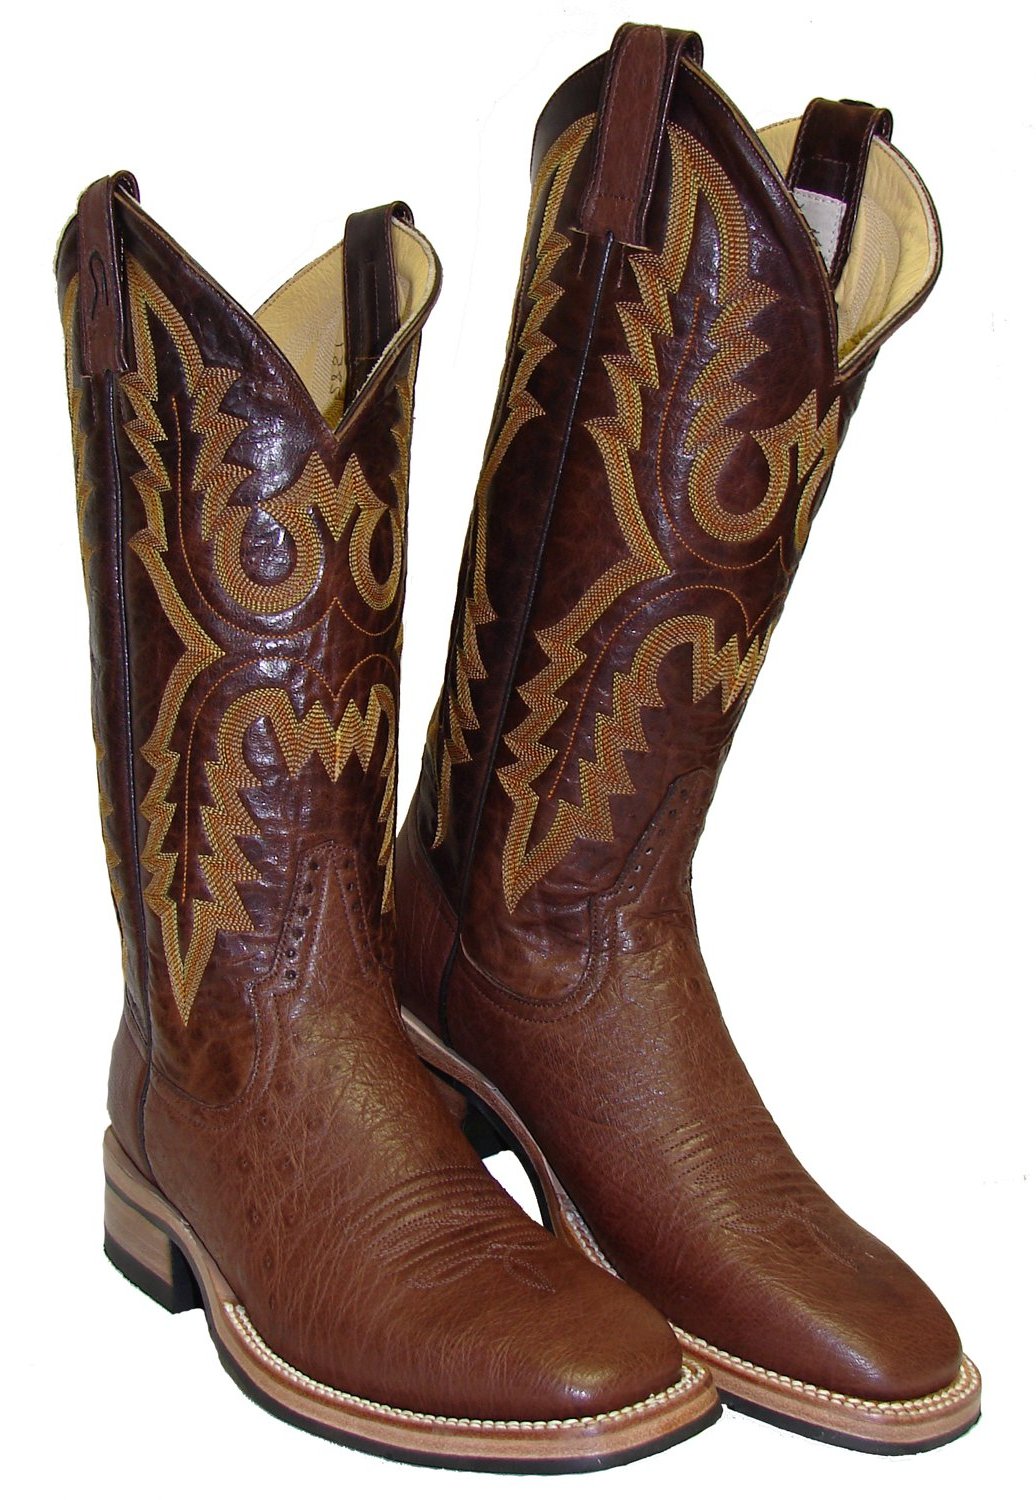 Pard's Western Shop Rod Patrick Tabac Smooth Ostrich Boots with EverSole